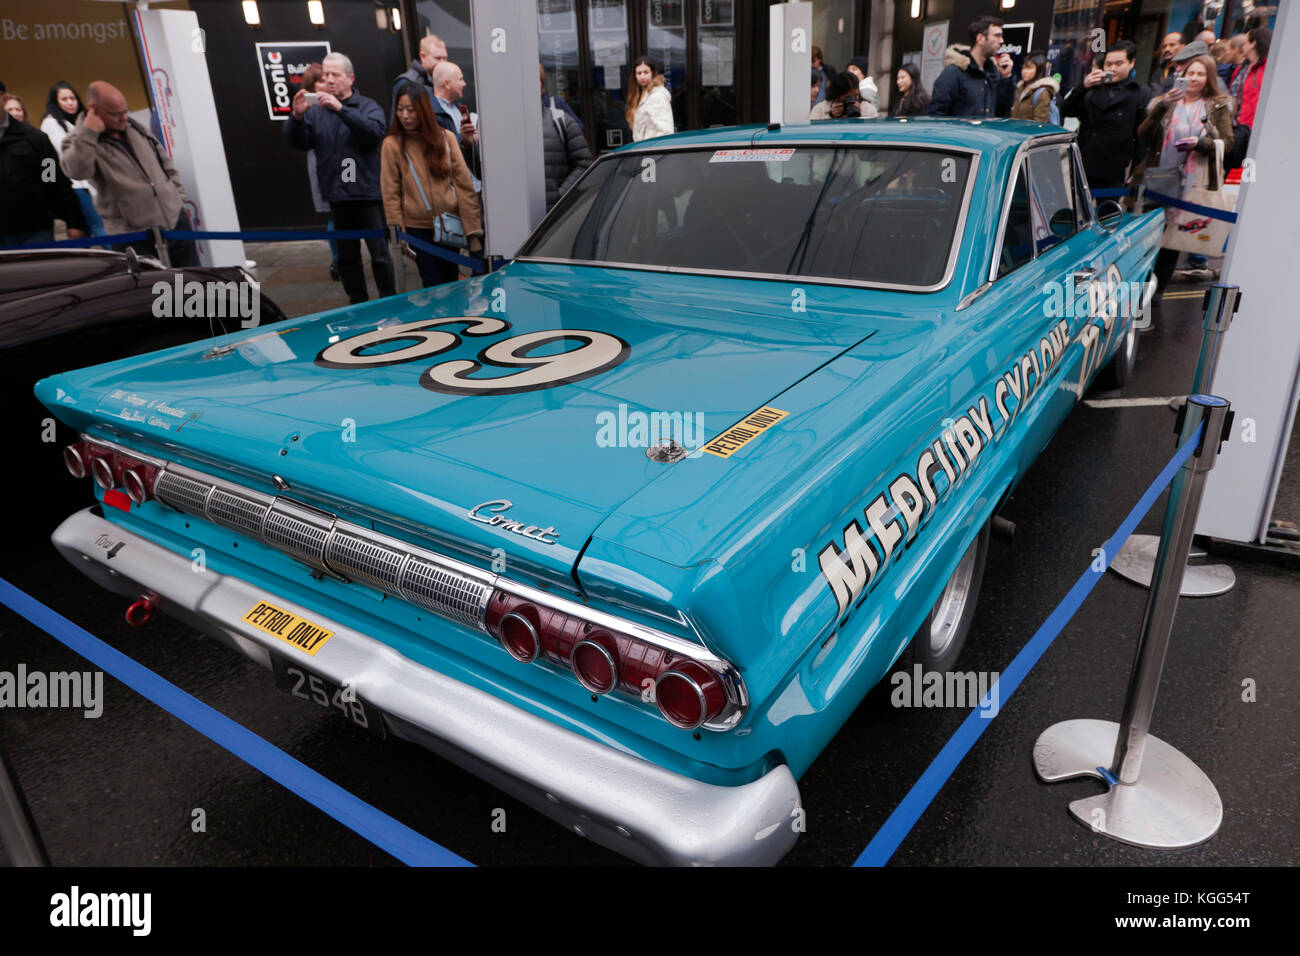 Rear view of a 1964 Mercury Comet Cyclone race car, driven by Emanuele Pirro and Roger Wills,  on display at the Regents Street Motor Show 2017. Stock Photo